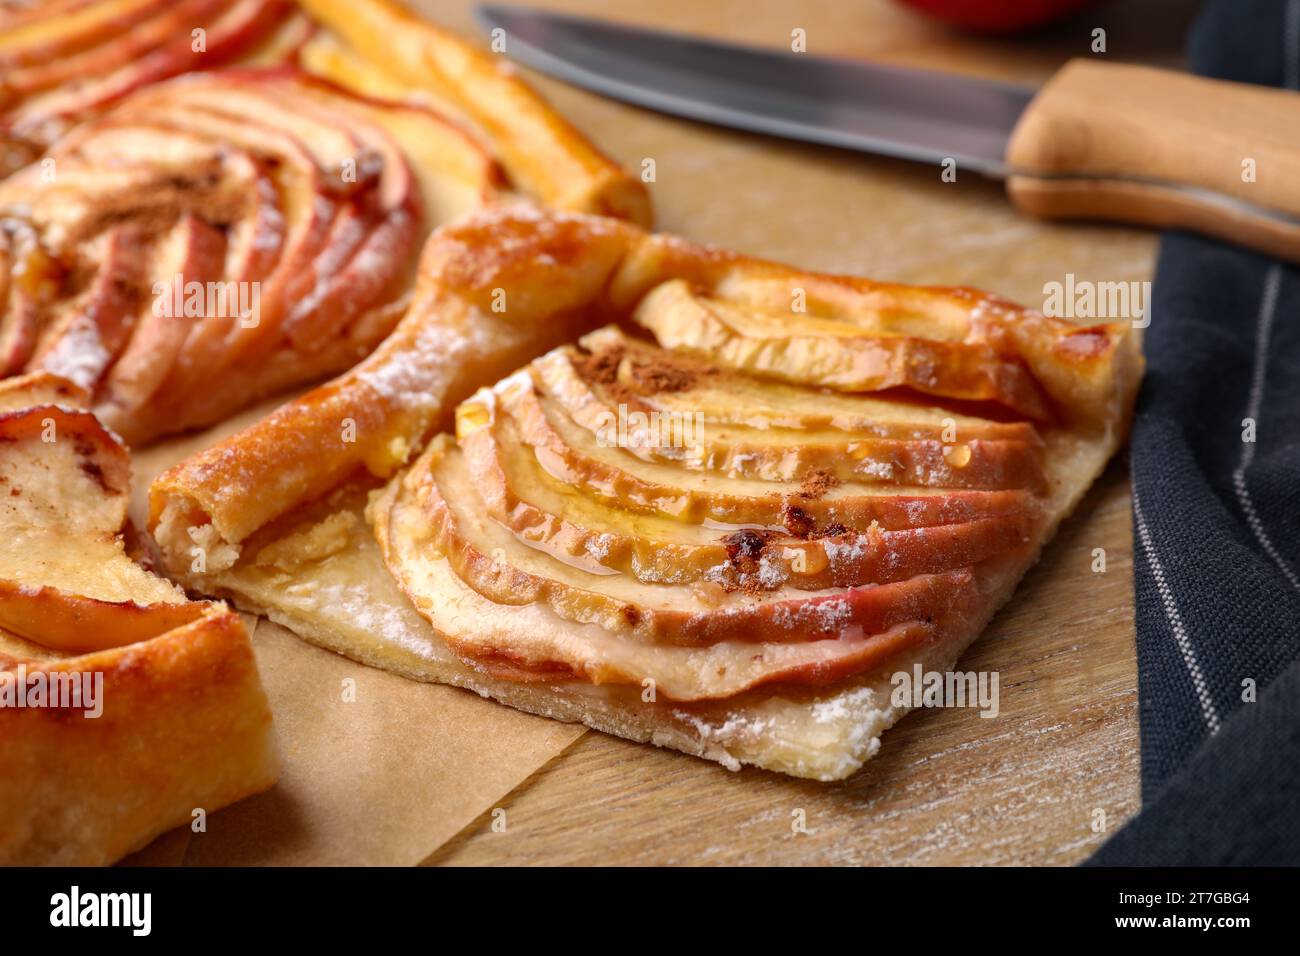 Piece of freshly baked apple pie on wooden table, closeup Stock Photo